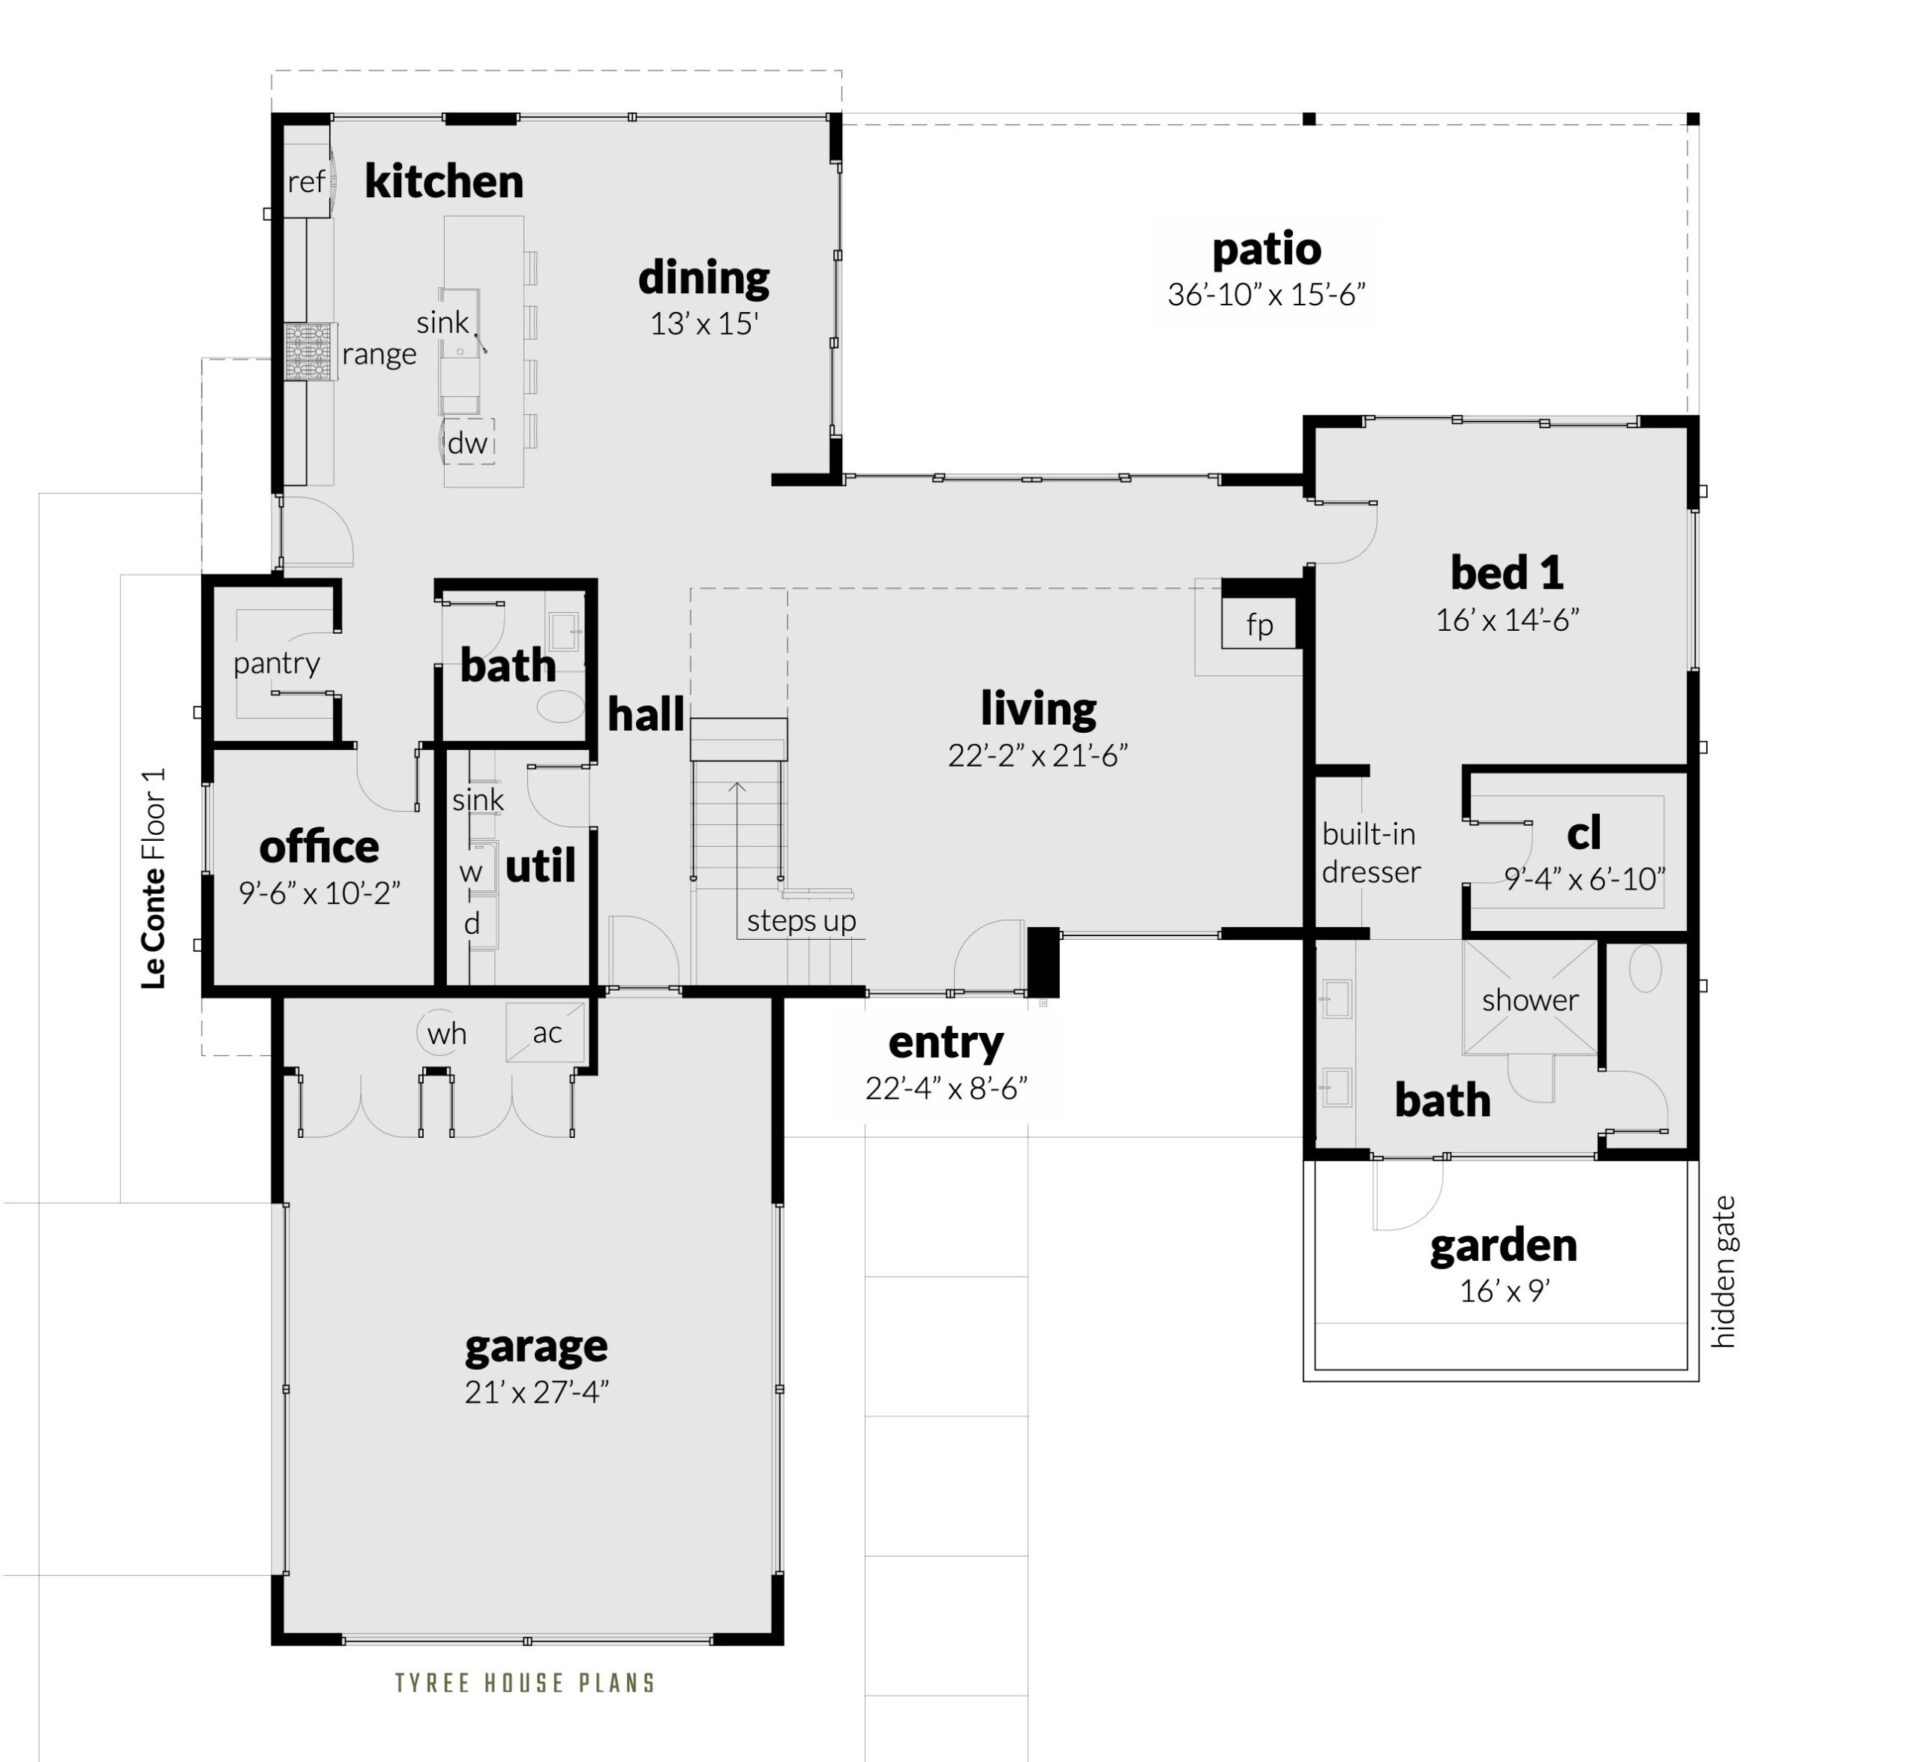 Floor 1 - Le Conte House Plan by Tyree House Plans